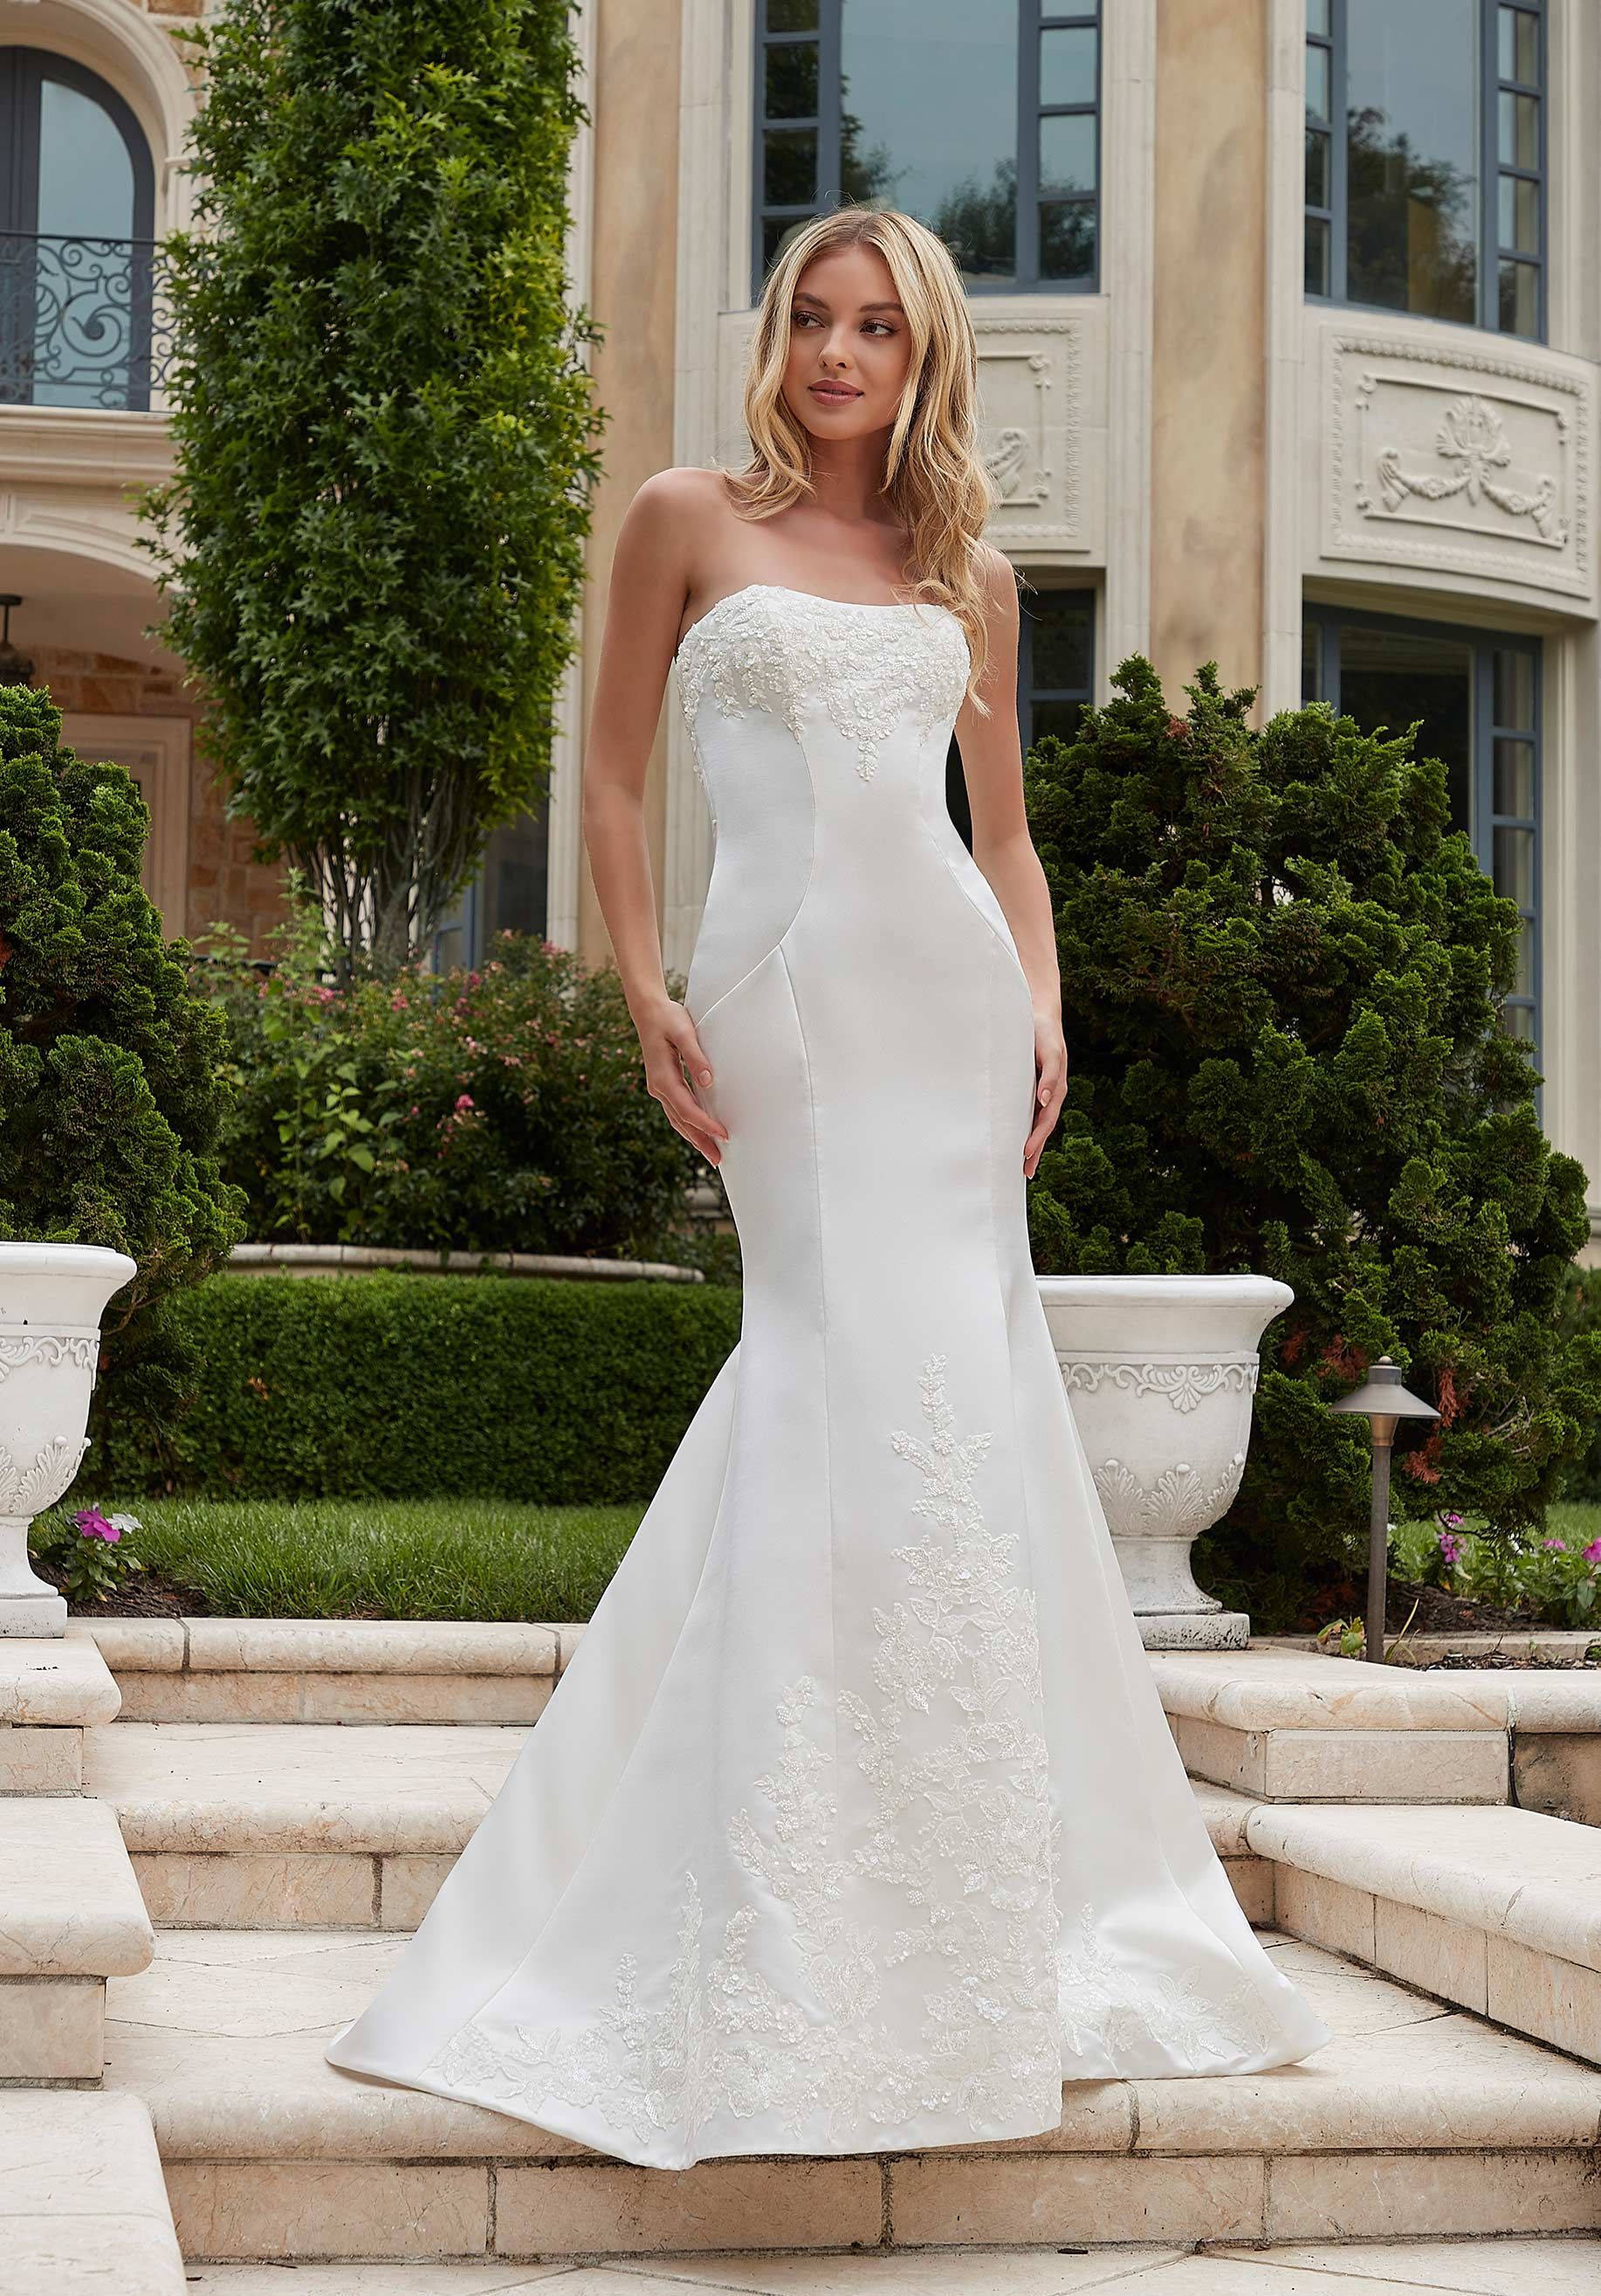 Our Phylicia designer wedding dress is a modern fit and flare with romantic touches. The chic gown glows in Duchess satin with contoured seaming to enhance your curves. The straight strapless neckline is accented by delicately beaded floral embroidery as well as the hemline to create a beautiful border on the chapel length train. Pair the dress with the matching Duchess Satin Overskirt with Floral Beaded Embroidery, sold separately as Style 11524, for a fuller silhouette. Shown in Ivory. Wedding dress by Morilee.